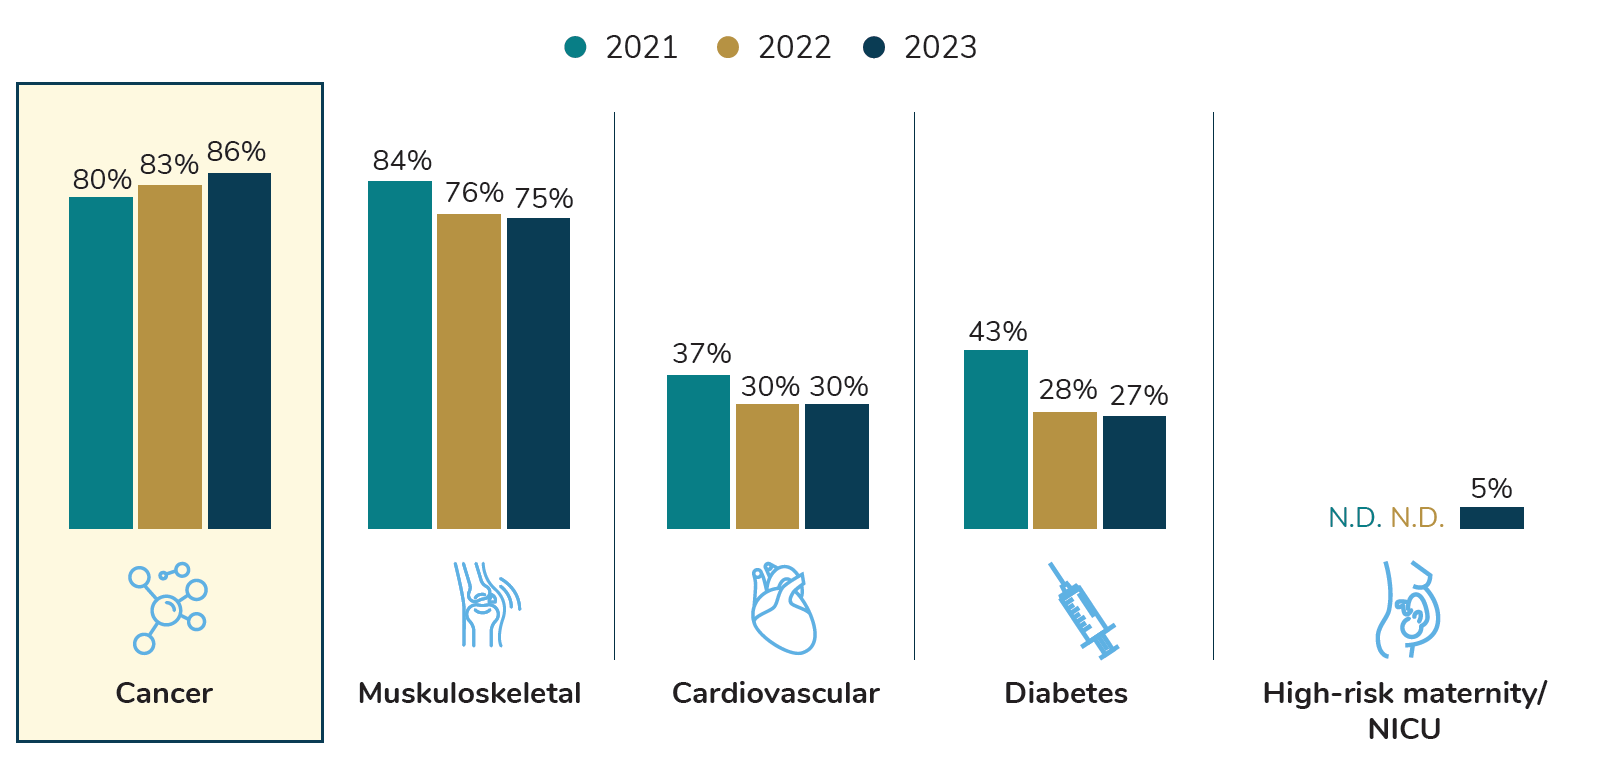 Top Conditions Driving Health Care Costs for Large Employers, 2021-2023. Cancer: 80%, 83%, 86%. Musculoskeletal: 84%, 76% 75%. Cardiovascular: 37%, 30% 30%. Diabetes: 43%, 28%, 27%.  High-risk maternity/NICU: nd, nd, 5%